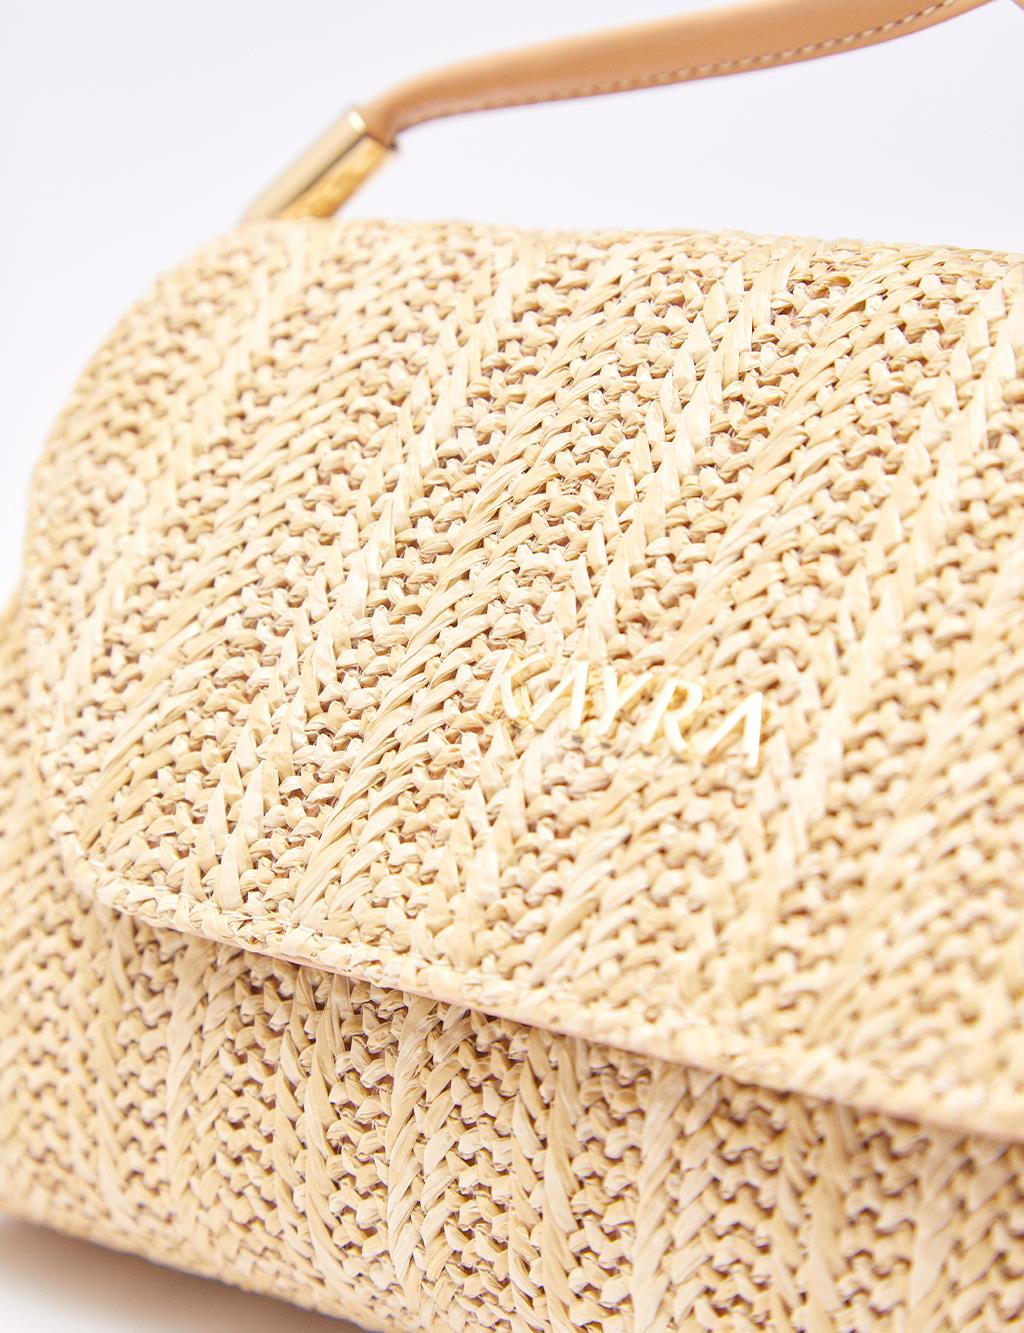 Straw Knitted Flap Bag Milky Brown